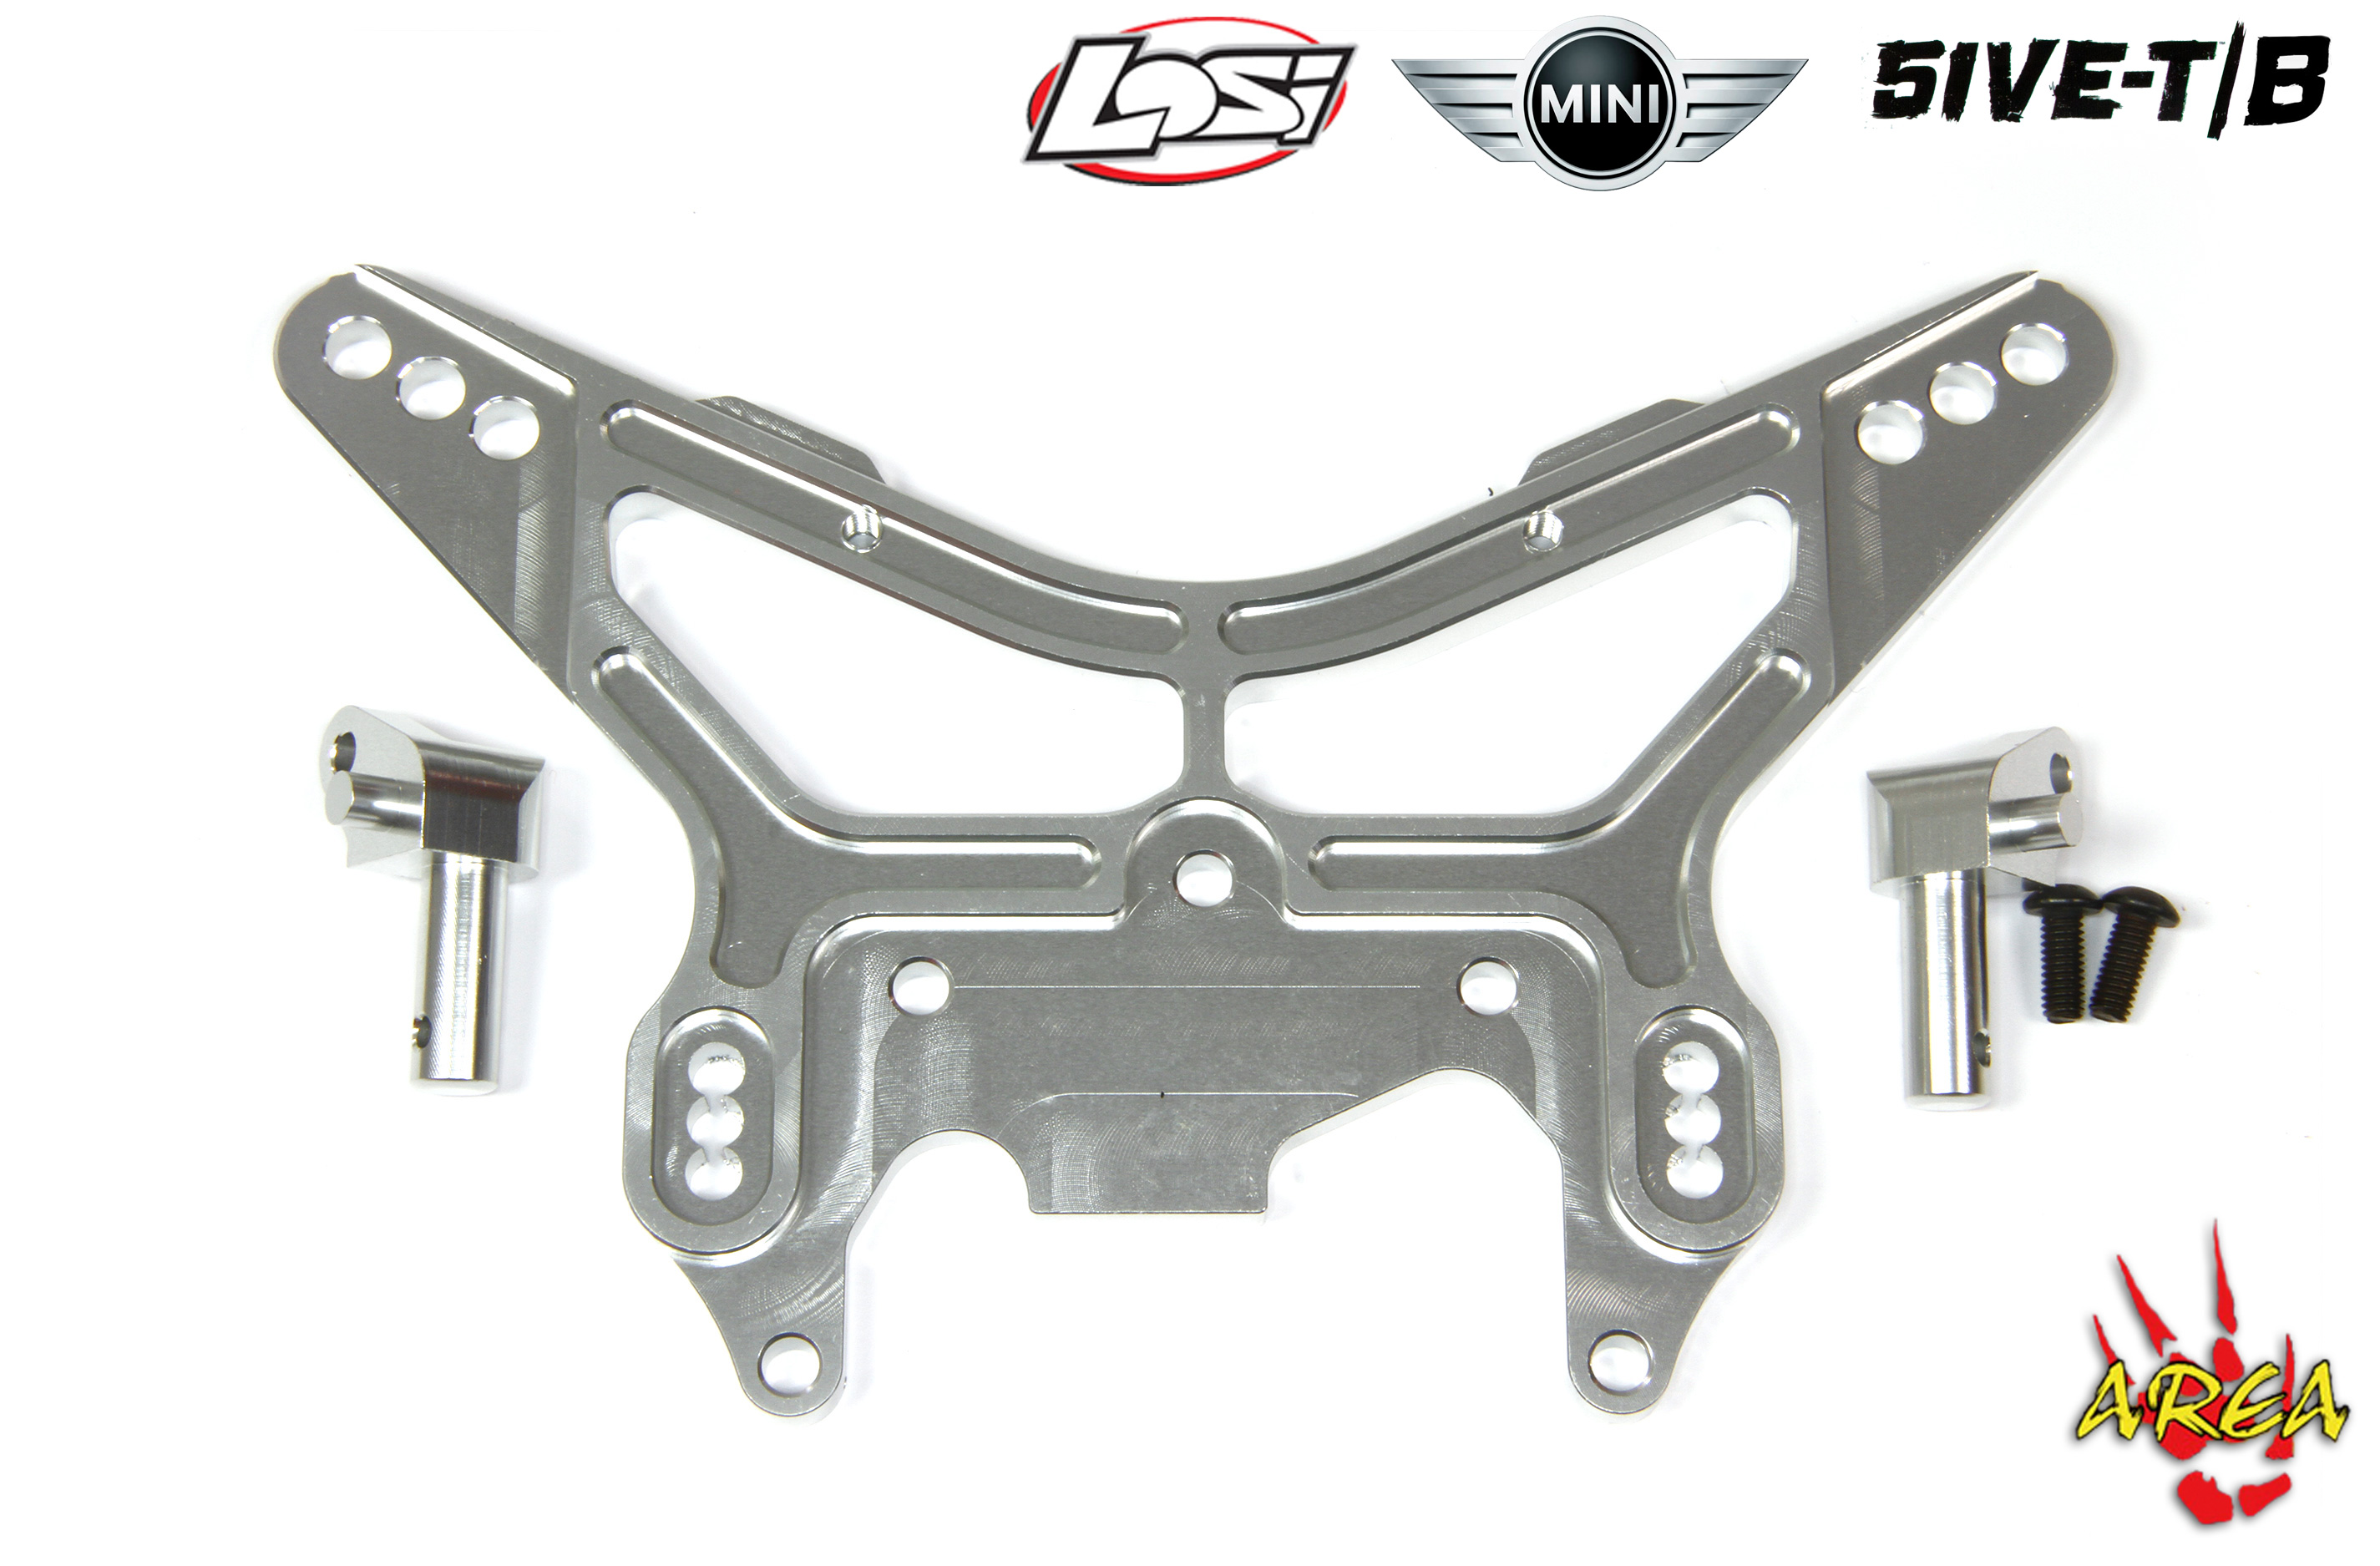 AREA-5T-020 Aluminum rear shock tower Losi 5ive-T/2.0/B and Mini